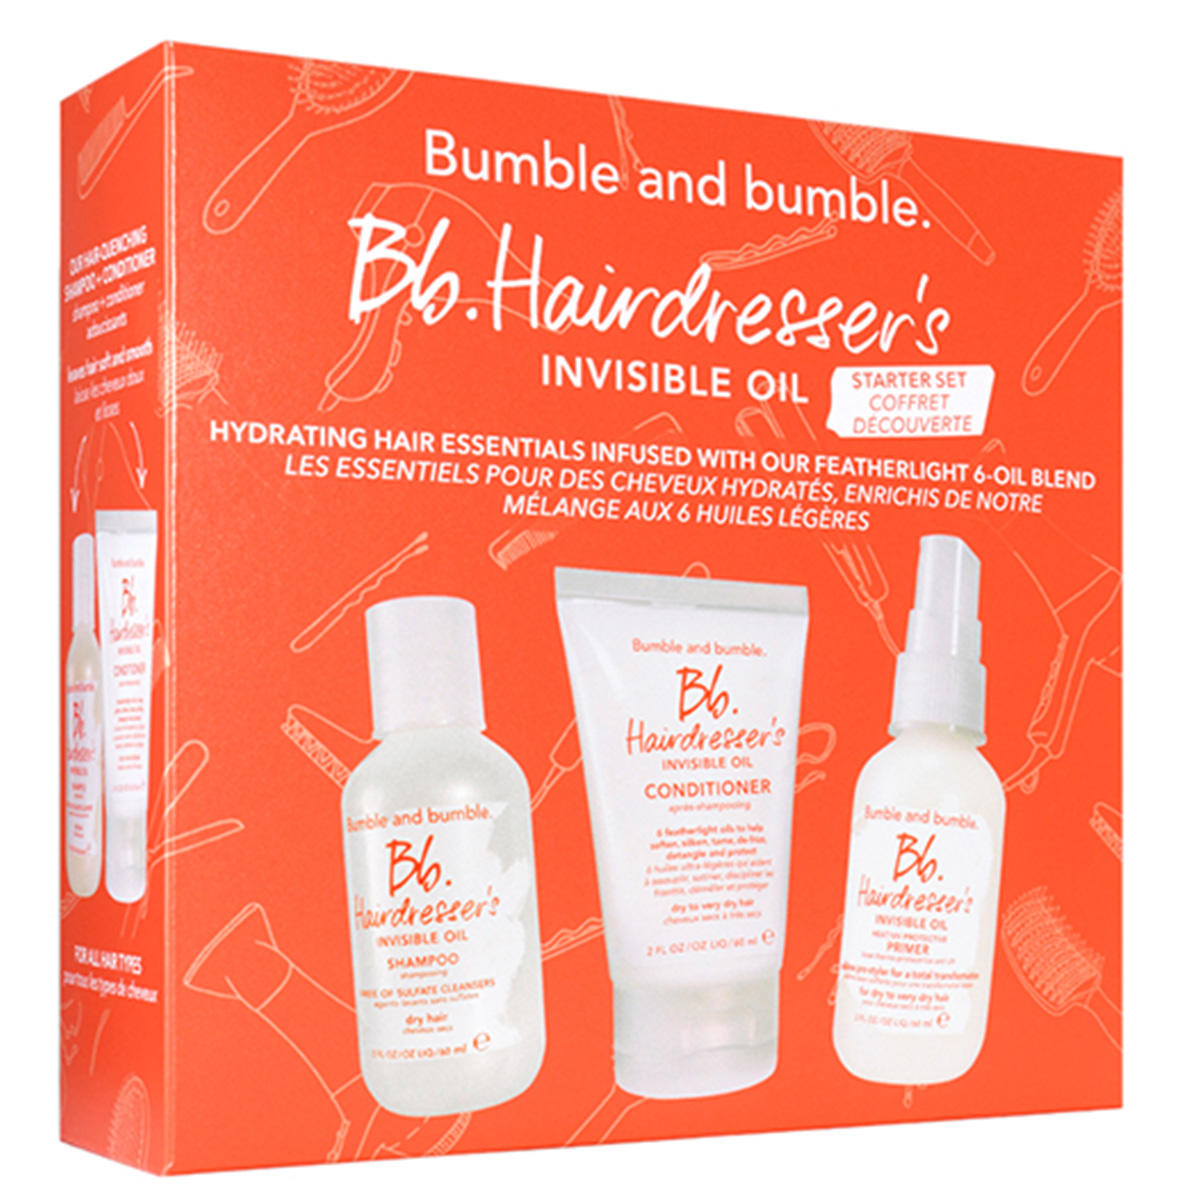 Bumble and bumble Hairdresser’s Oil Trial Set  - 2